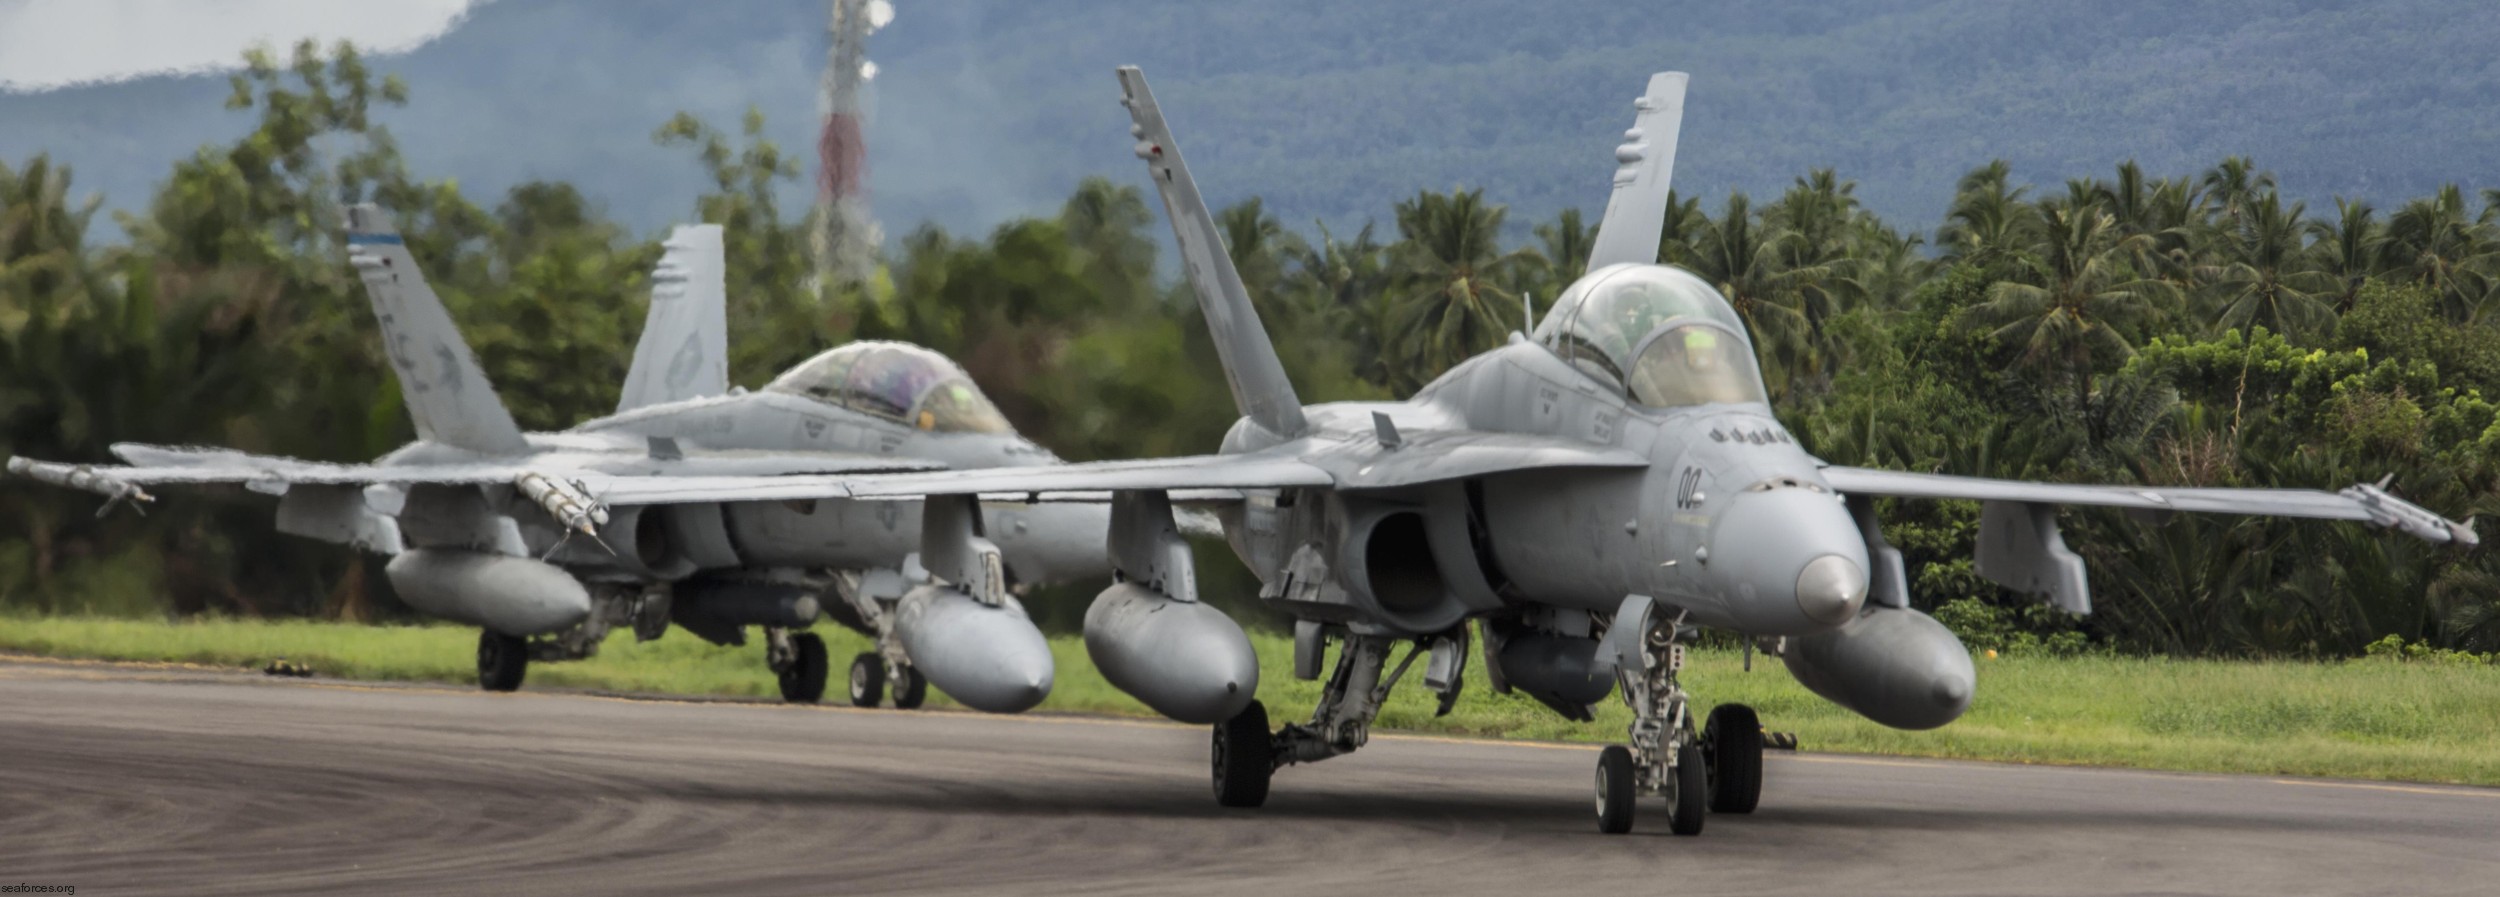 vmfa(aw)-225 vikings marine fighter attack squadron f/a-18d hornet 34